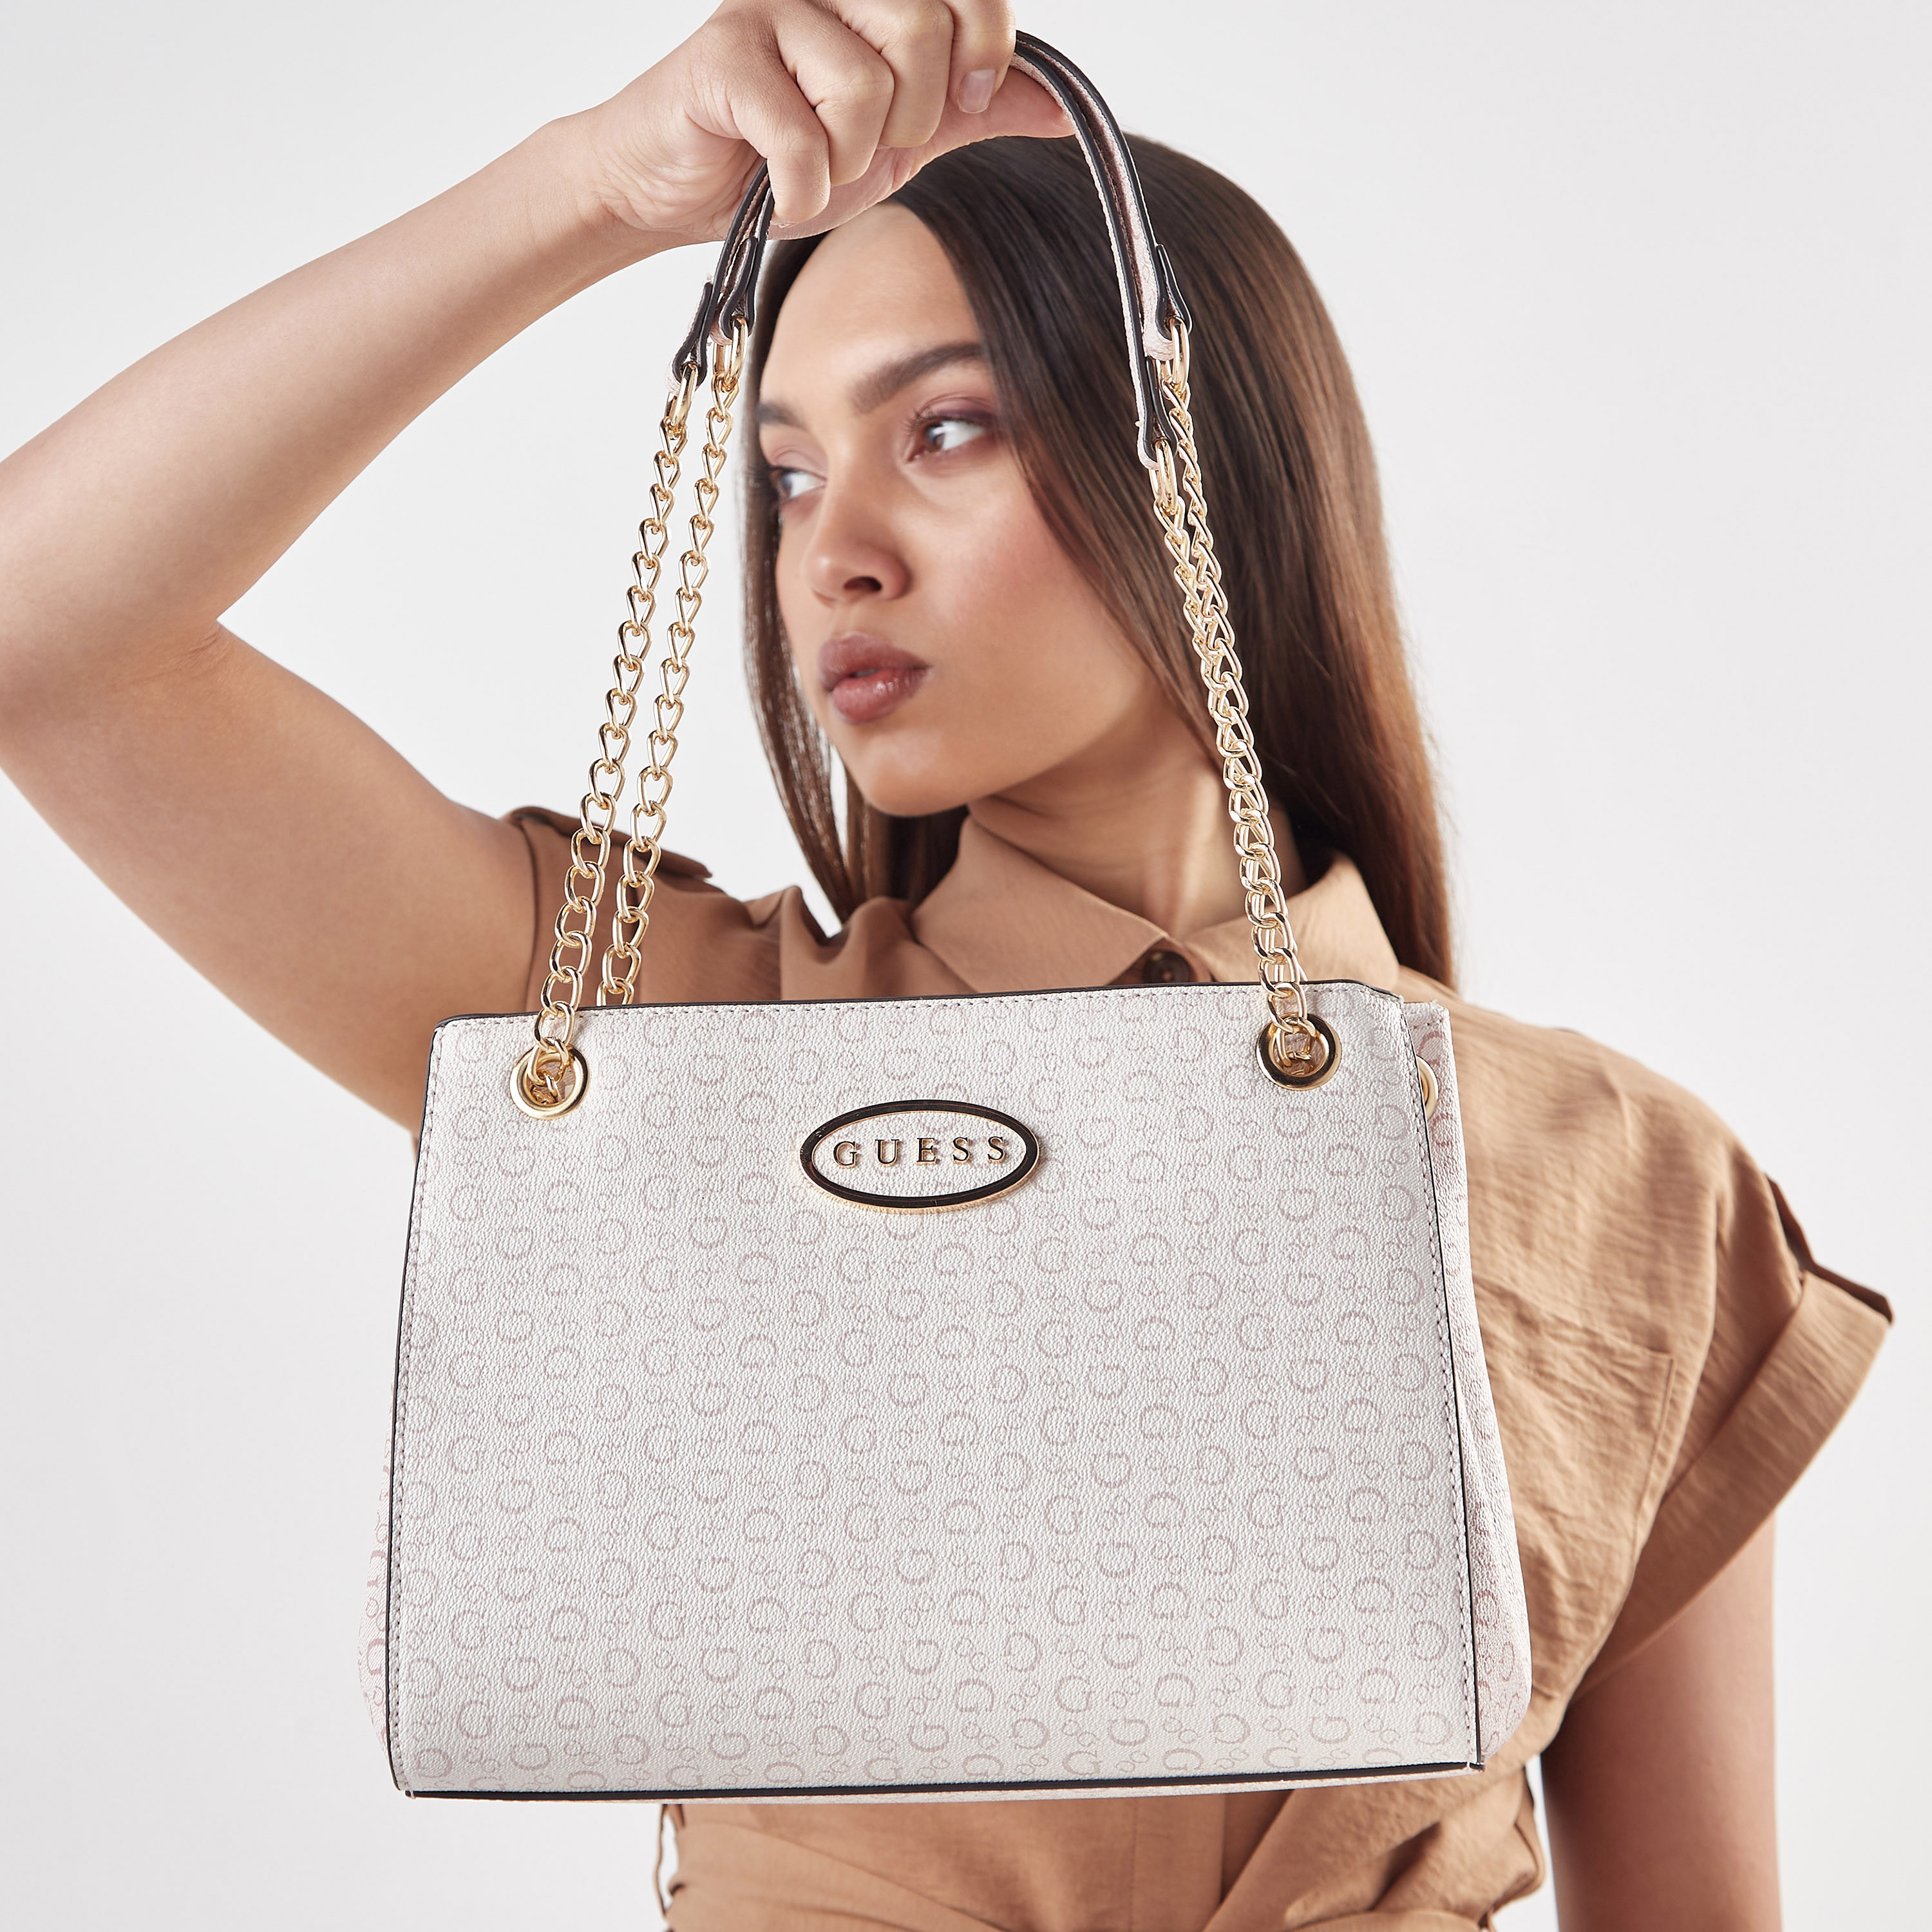 Guess Bags & Handbags for Women on sale - Outlet | FASHIOLA.co.uk